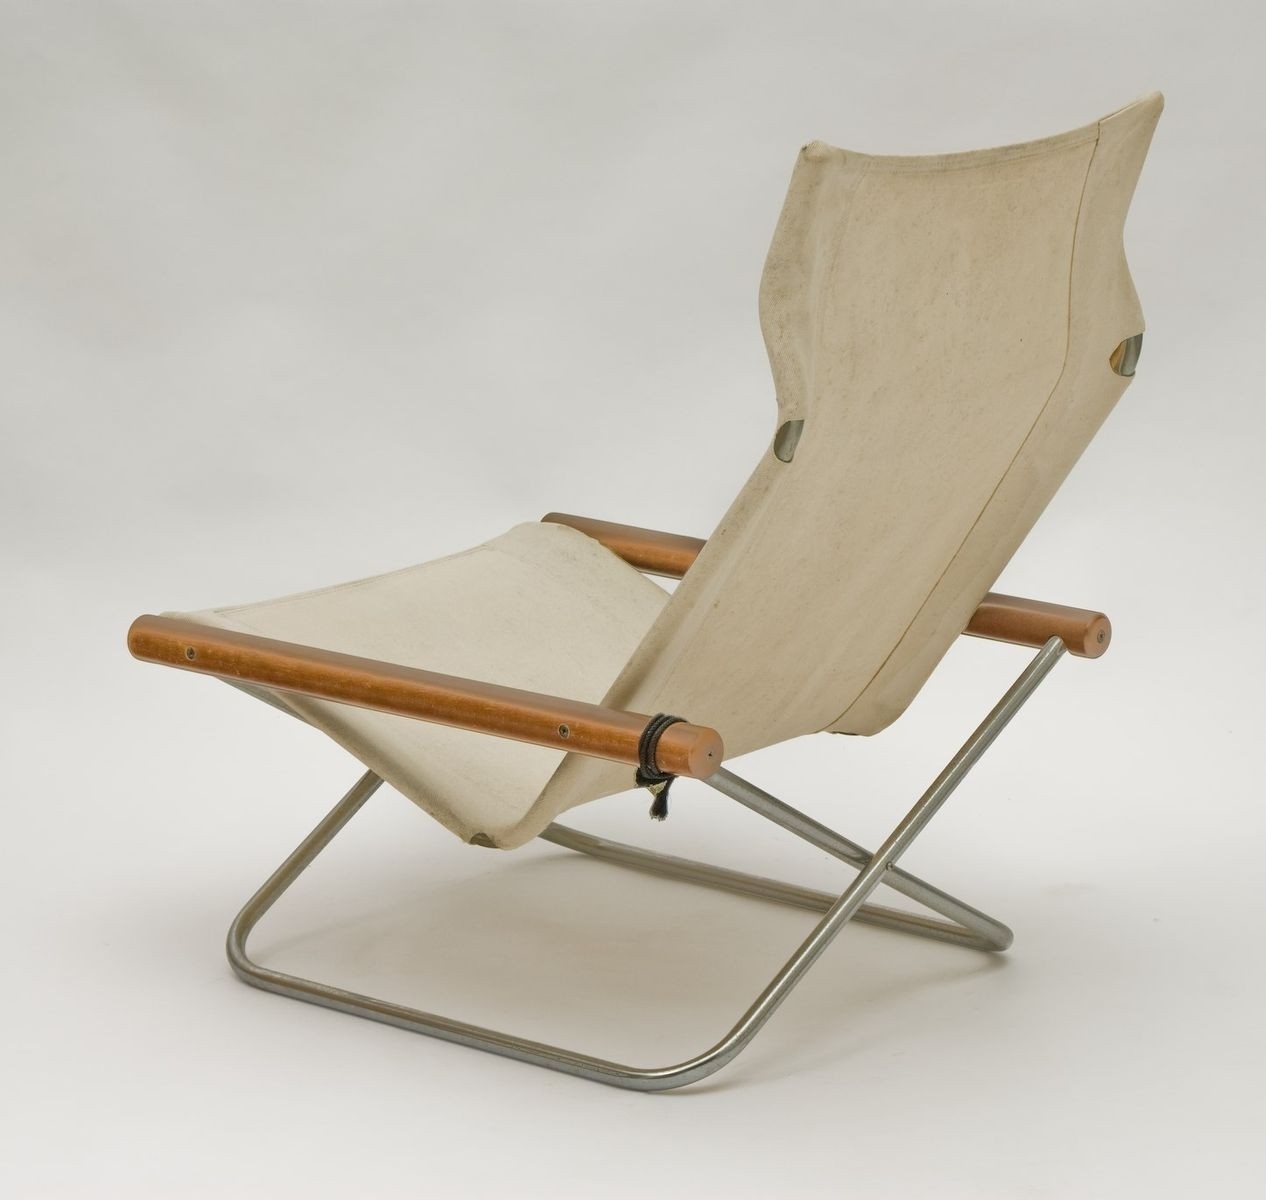 Japanese nychair folding chair by takeshi nii for sale at